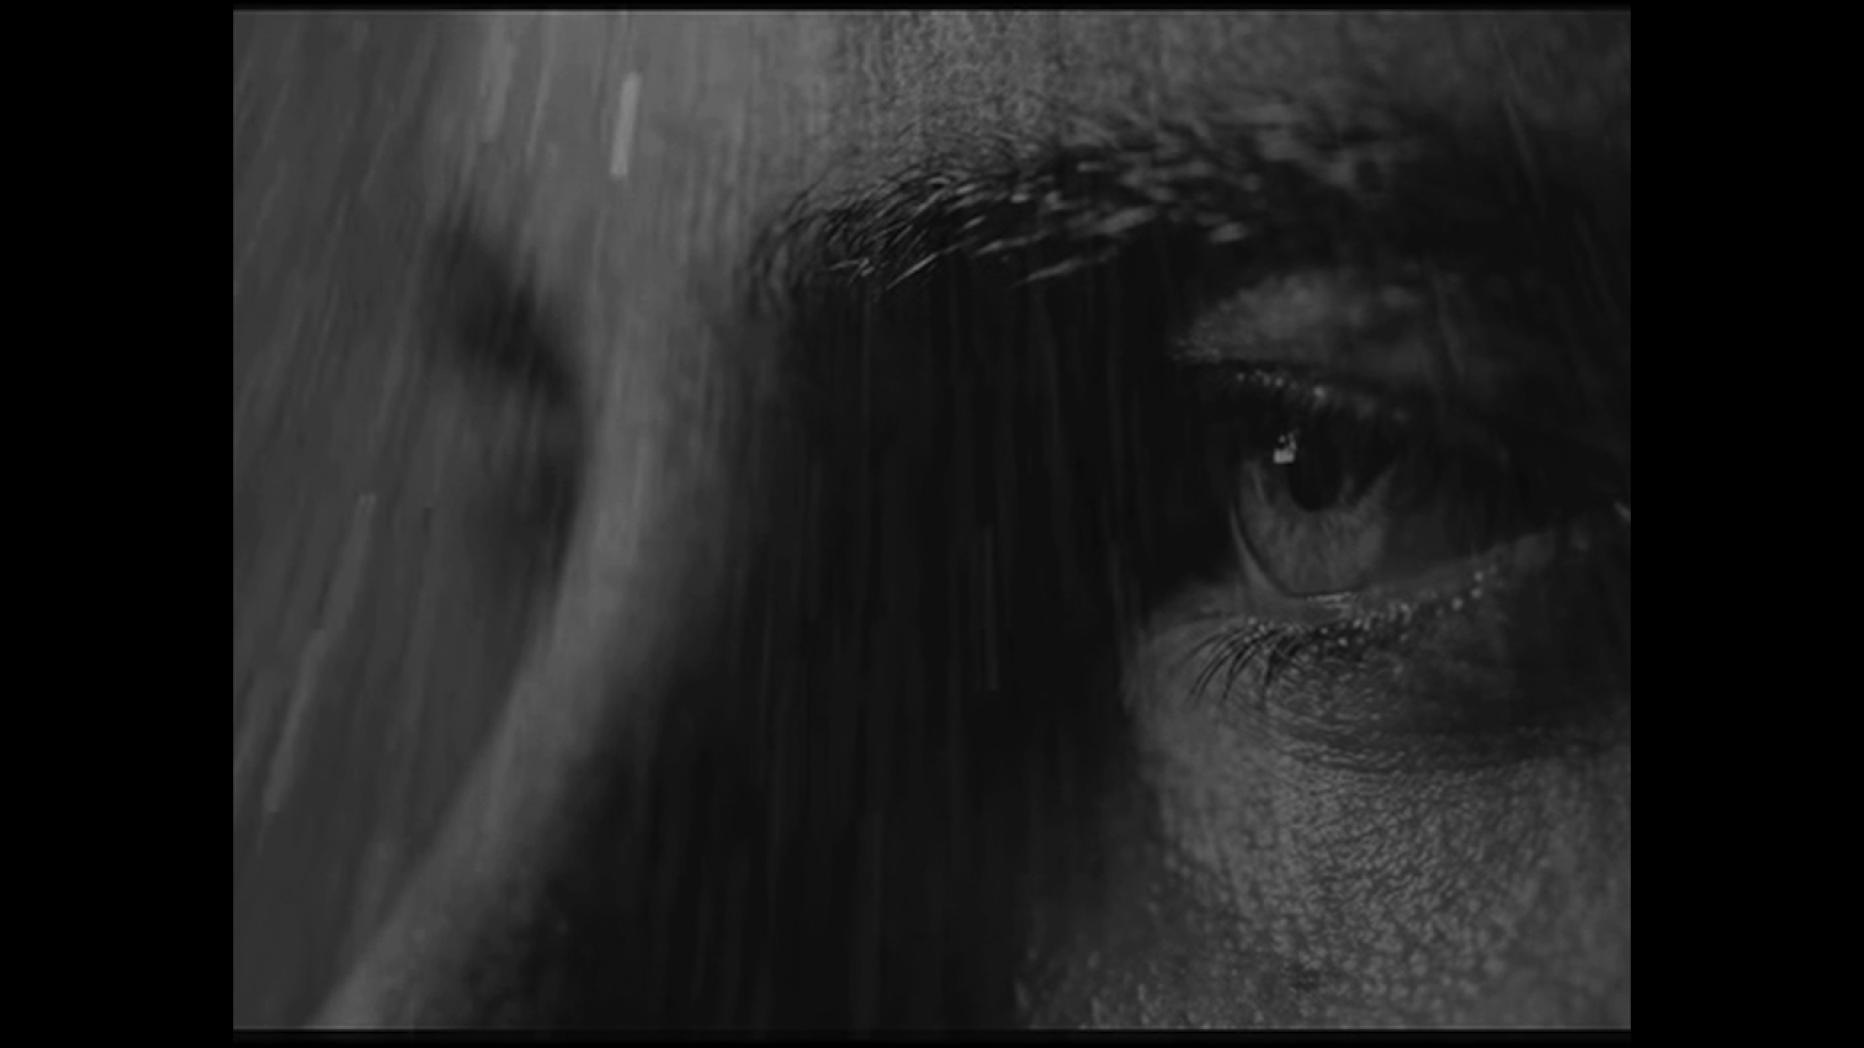 Black and white close up of a man's eyes in the rain.